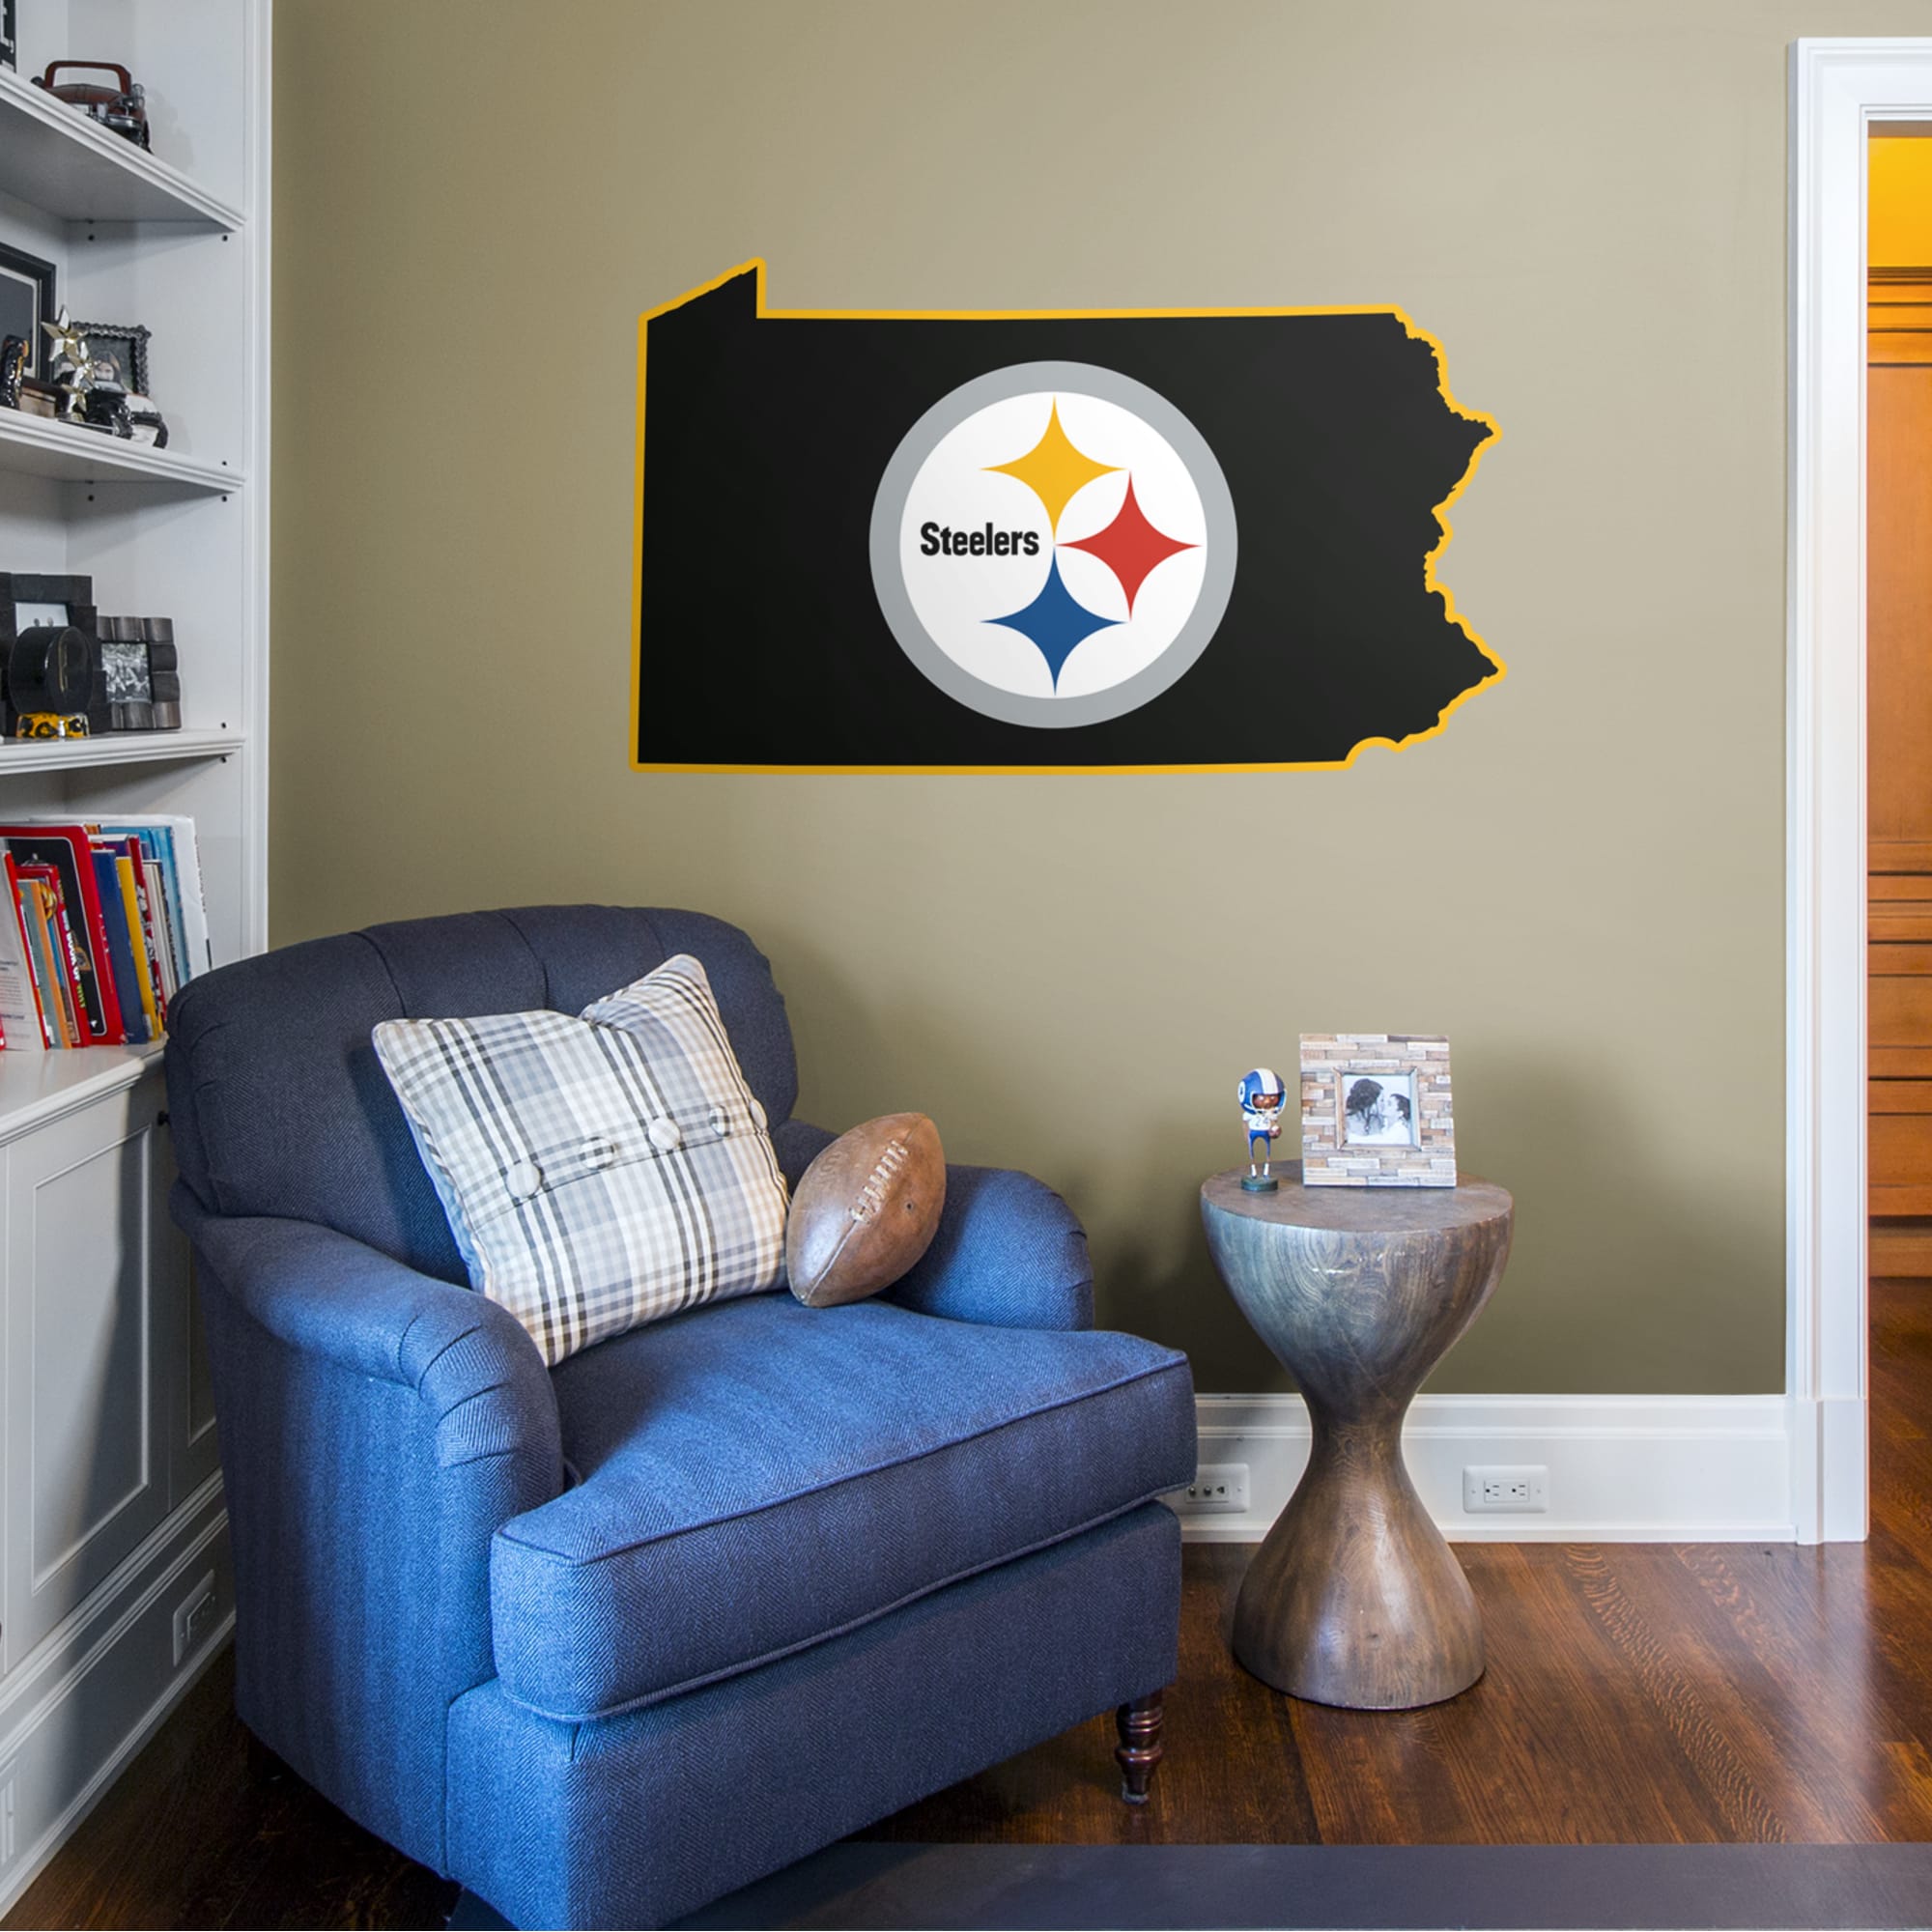 Pittsburgh Steelers: State of Pennsylvania - Officially Licensed NFL Removable Wall Decal 51.0"W x 30.0"H by Fathead | Vinyl